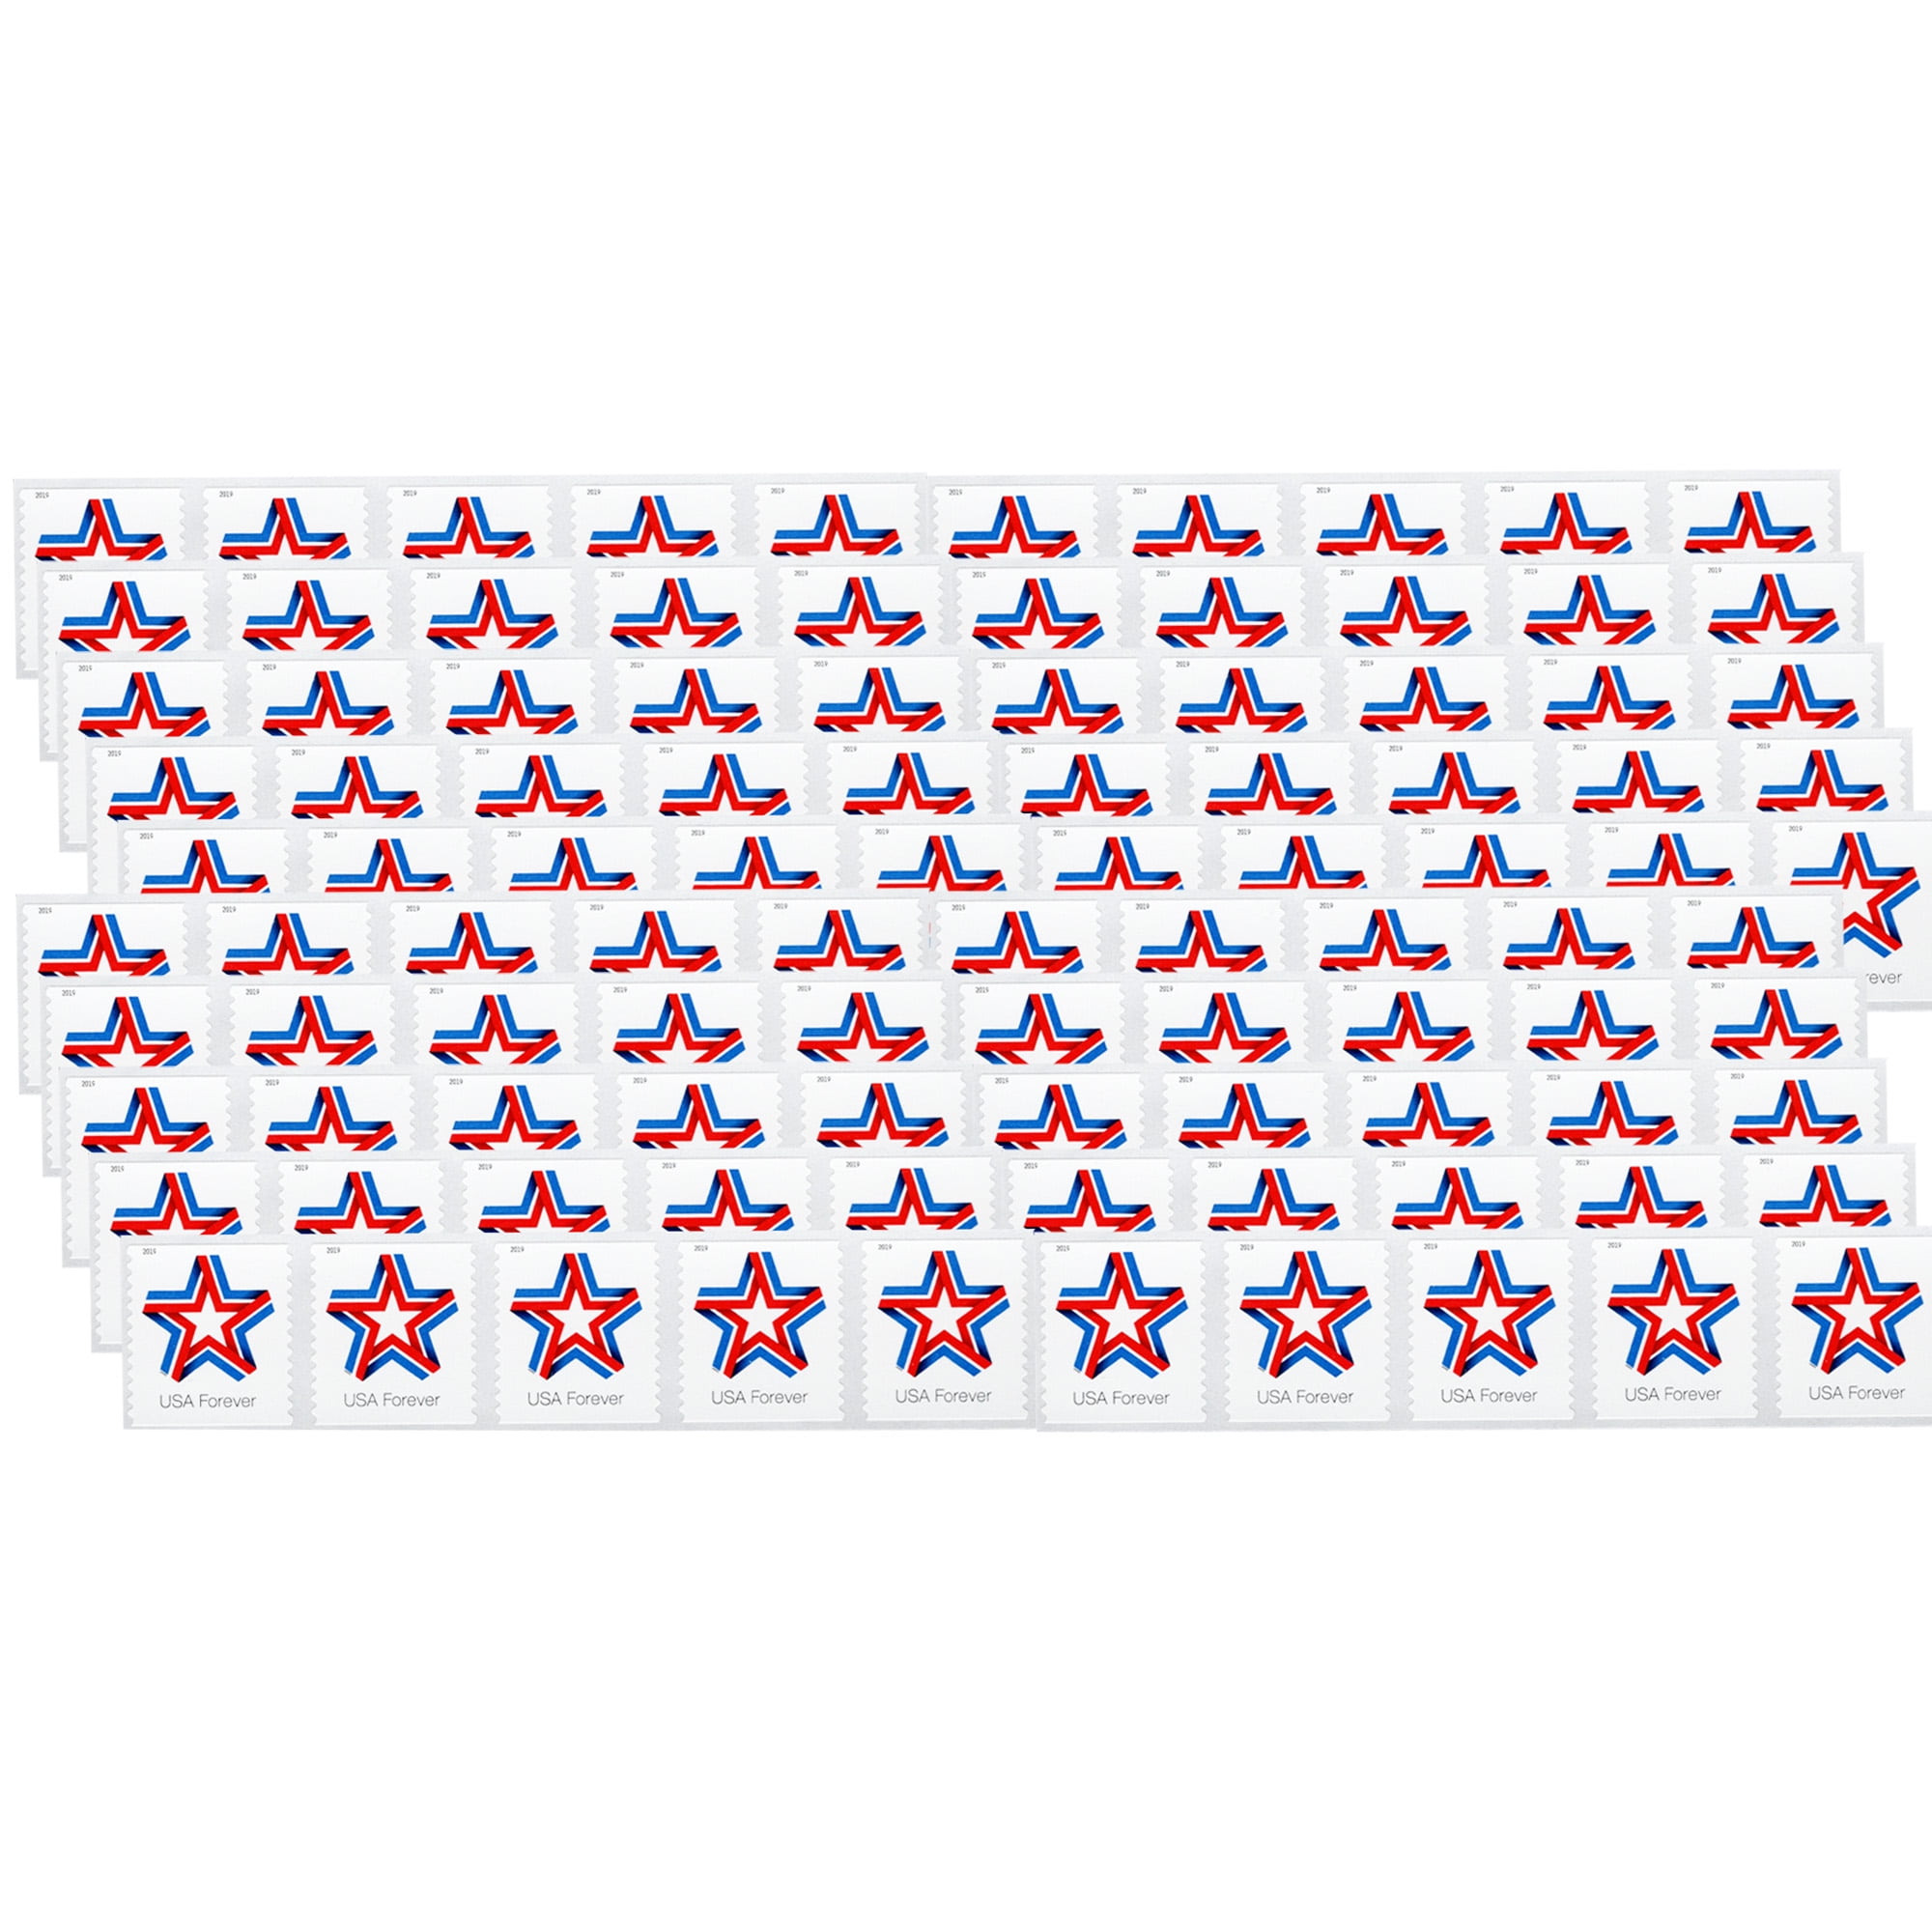 USPS First-Class Forever Stamp, 100-count